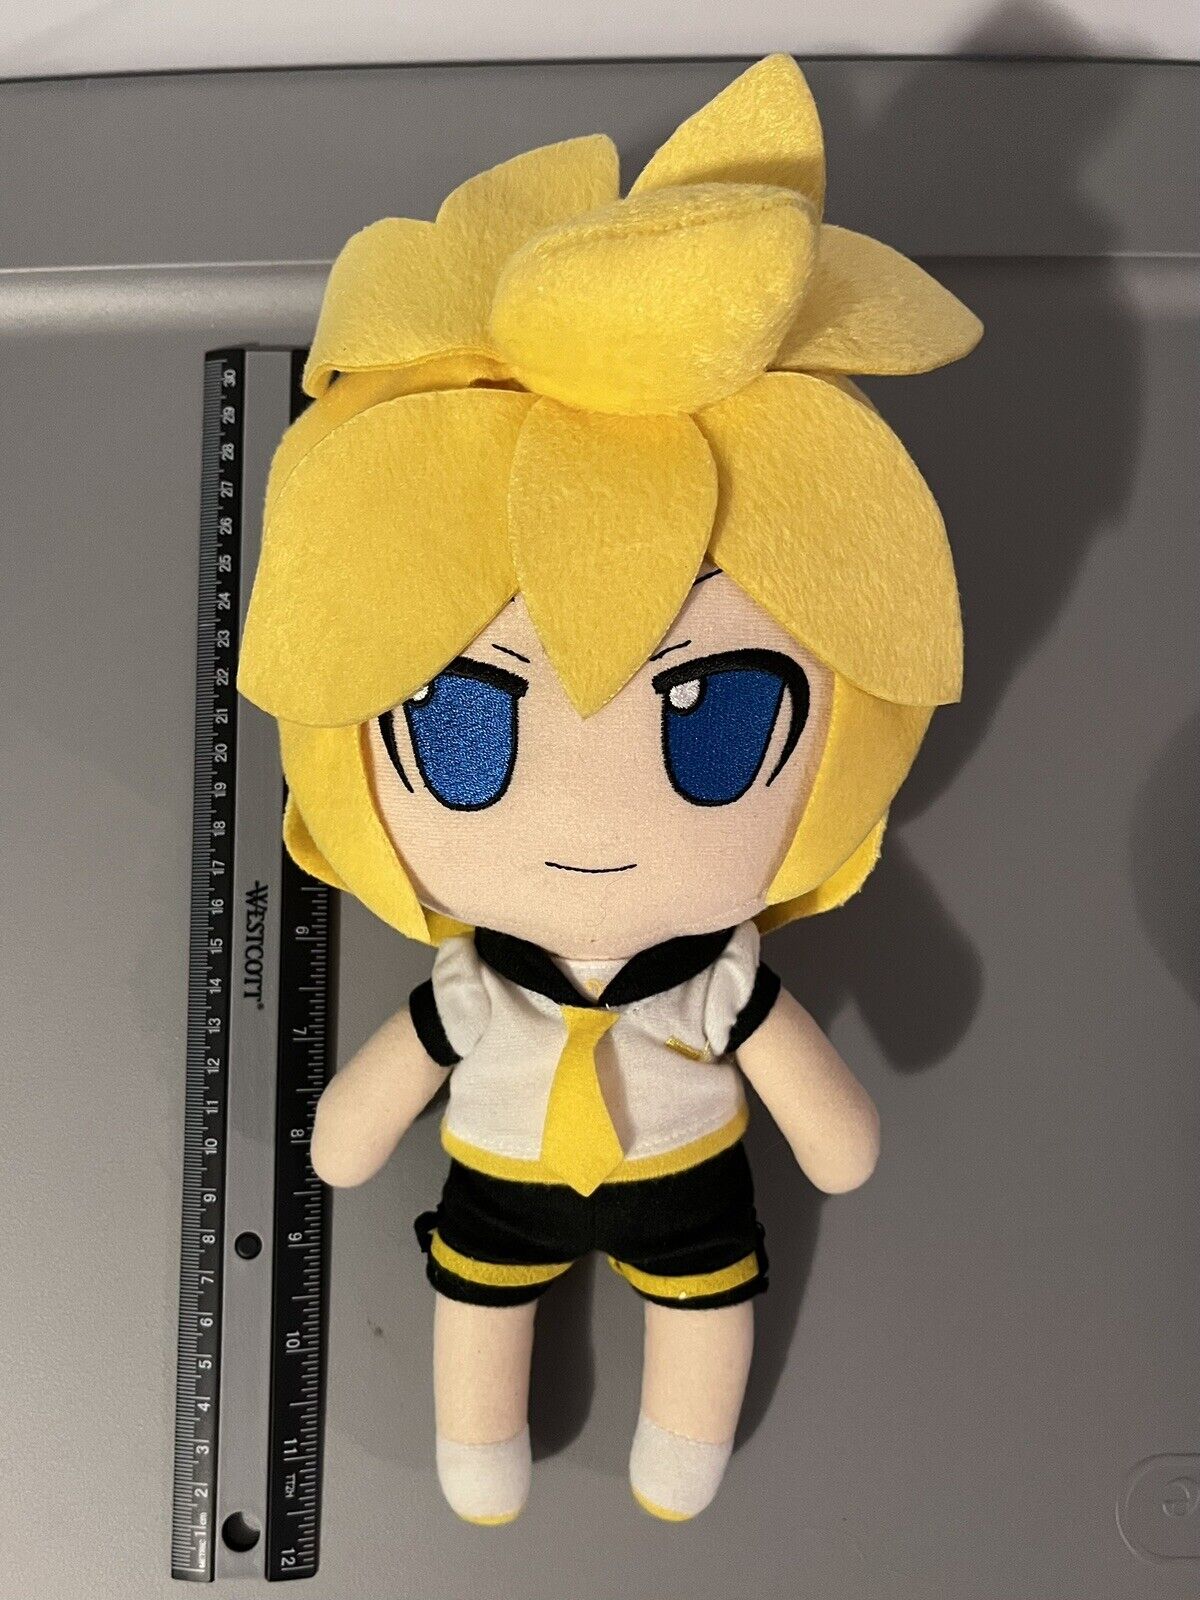 GIFT Vocaloid KAGAMINE RIN Plush Nenderiod Plus Possible Doll 2011 RARE Official